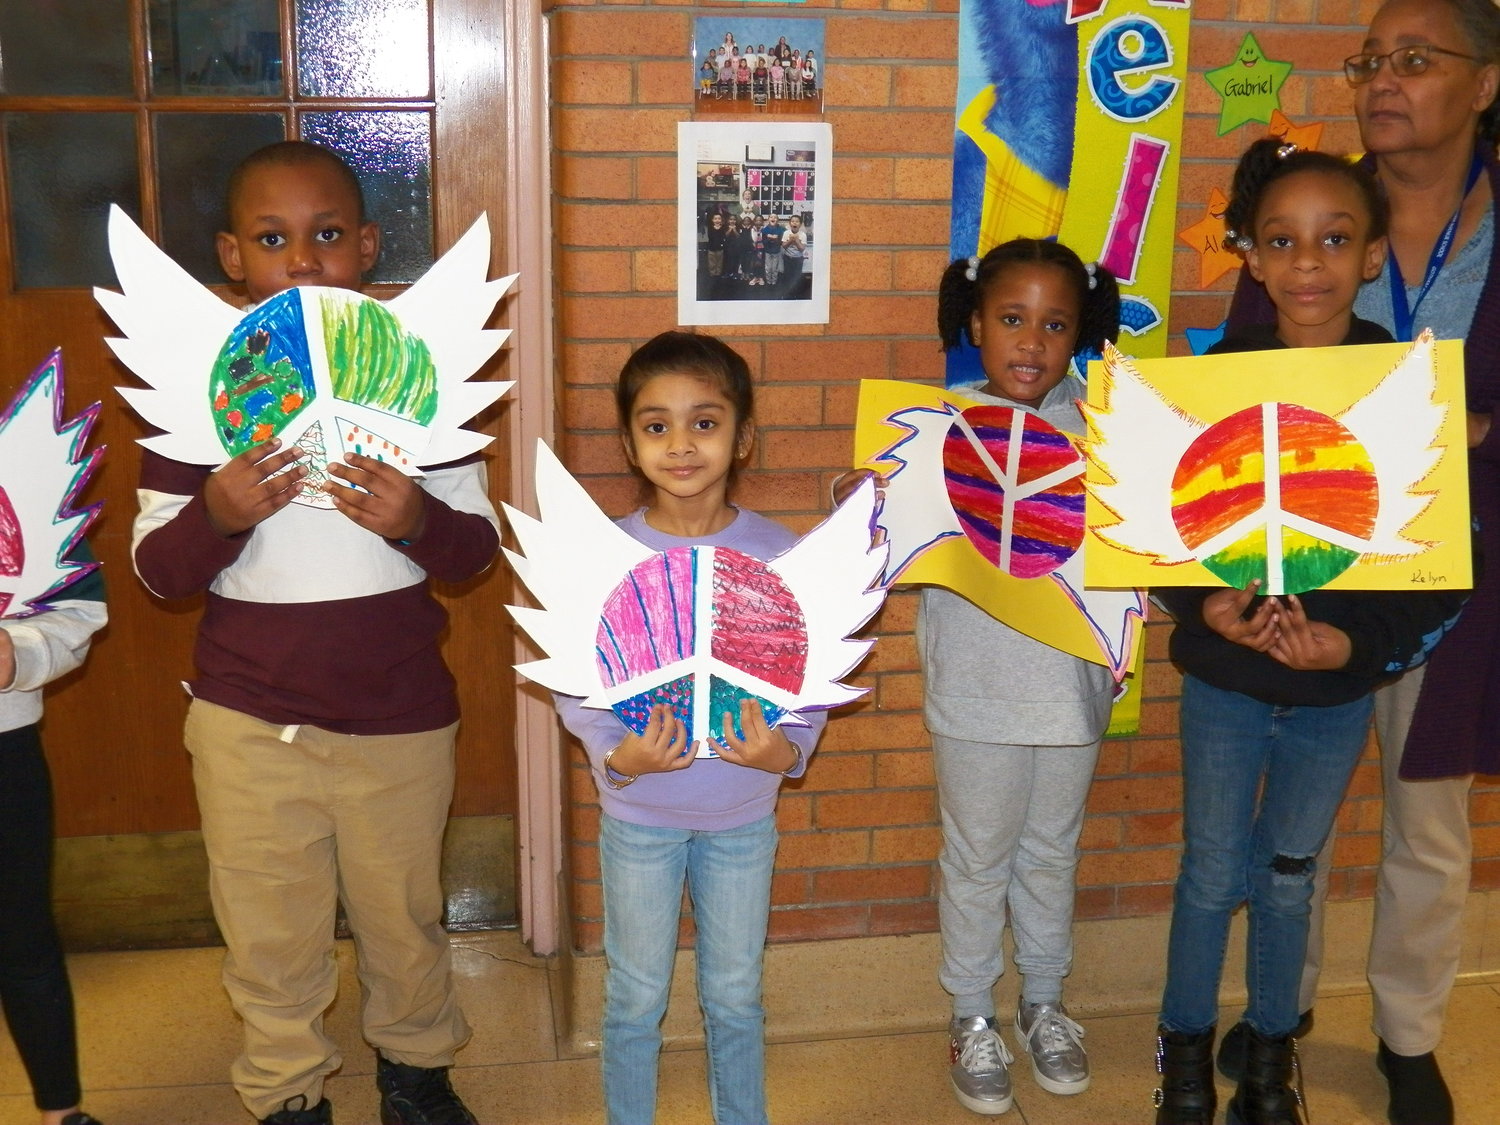 In addition to signs, the elementary students got even more creative with their decorations. This class made vibrant peace symbols with wings.